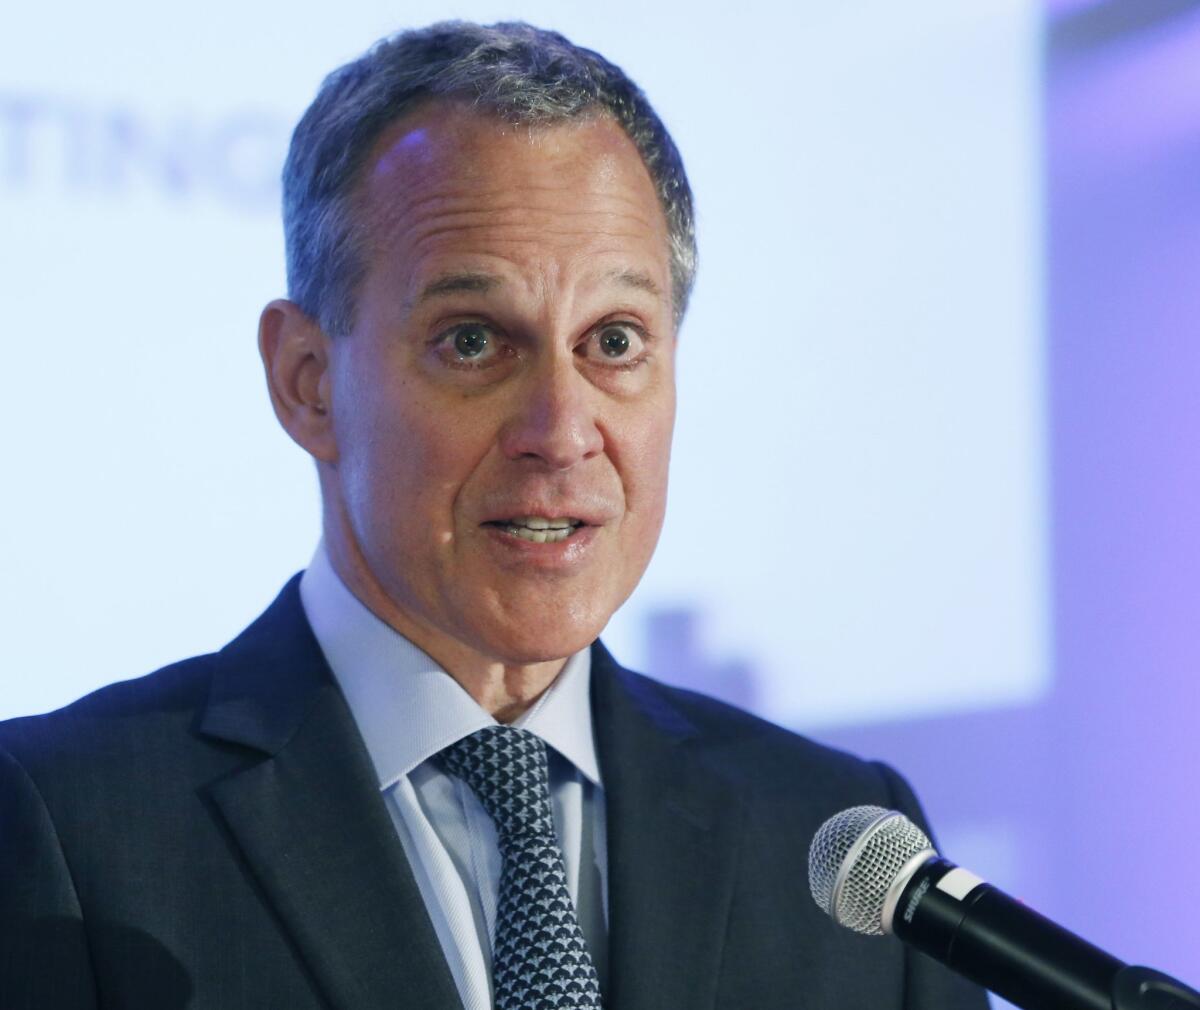 New York State Attorney General Eric Schneiderman speaks during an annual meeting of the Business Council of New York State on Sept. 19, 2014.